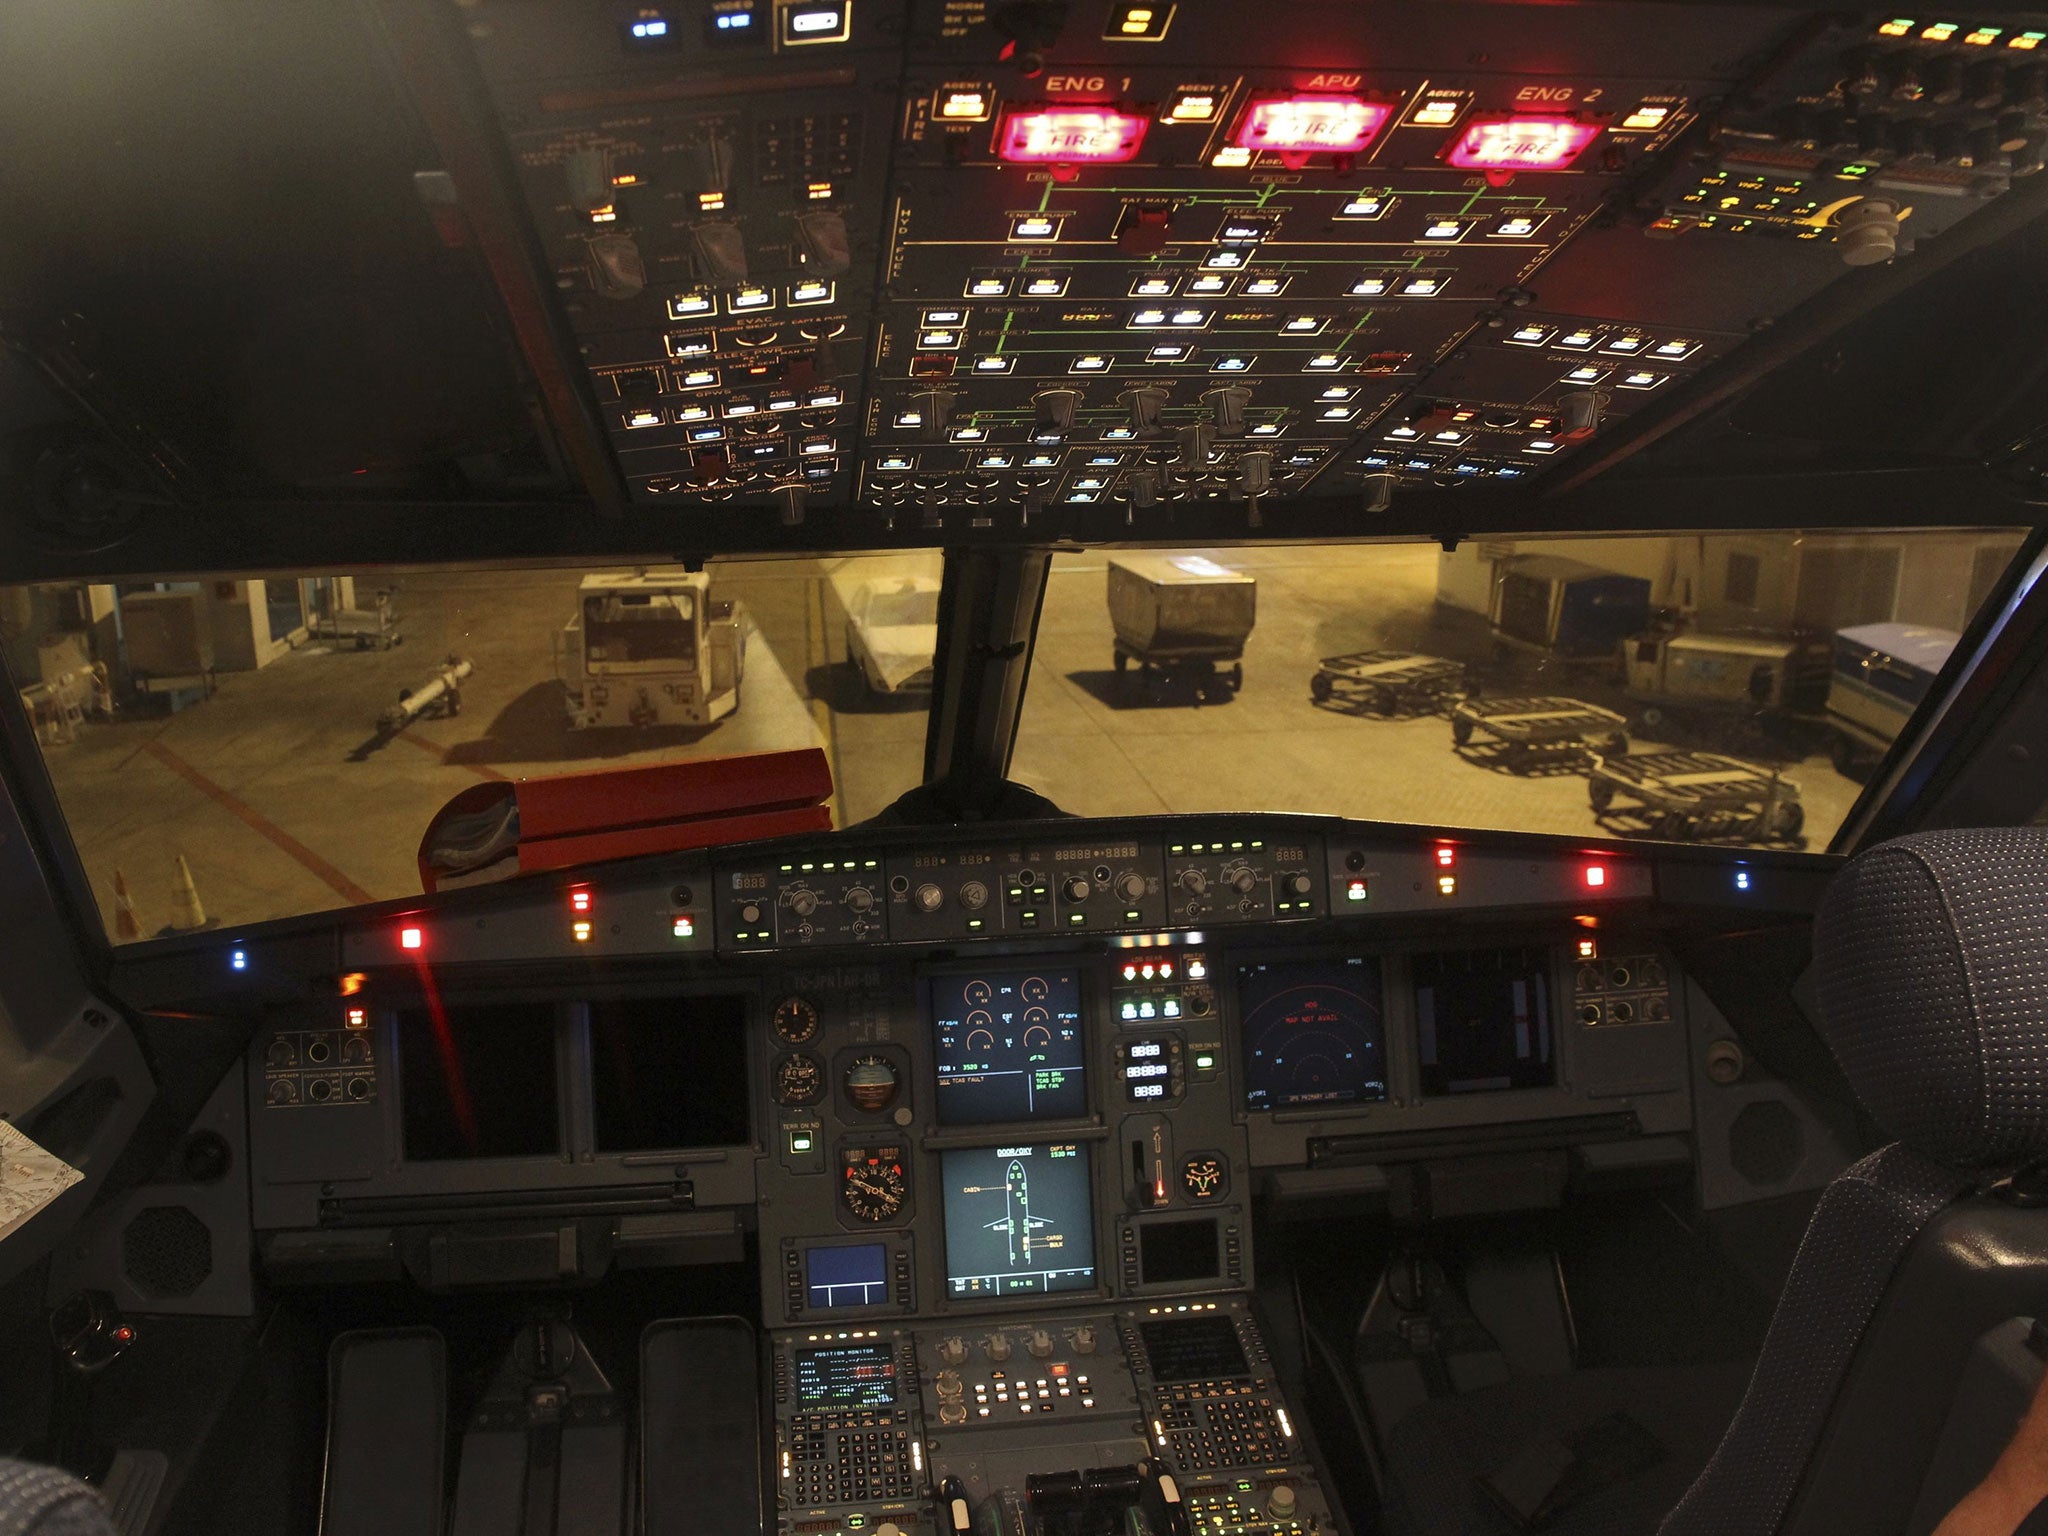 Inside the flight deck of an Airbus A320, the same plane as flight 9525 that crashed in the Alps